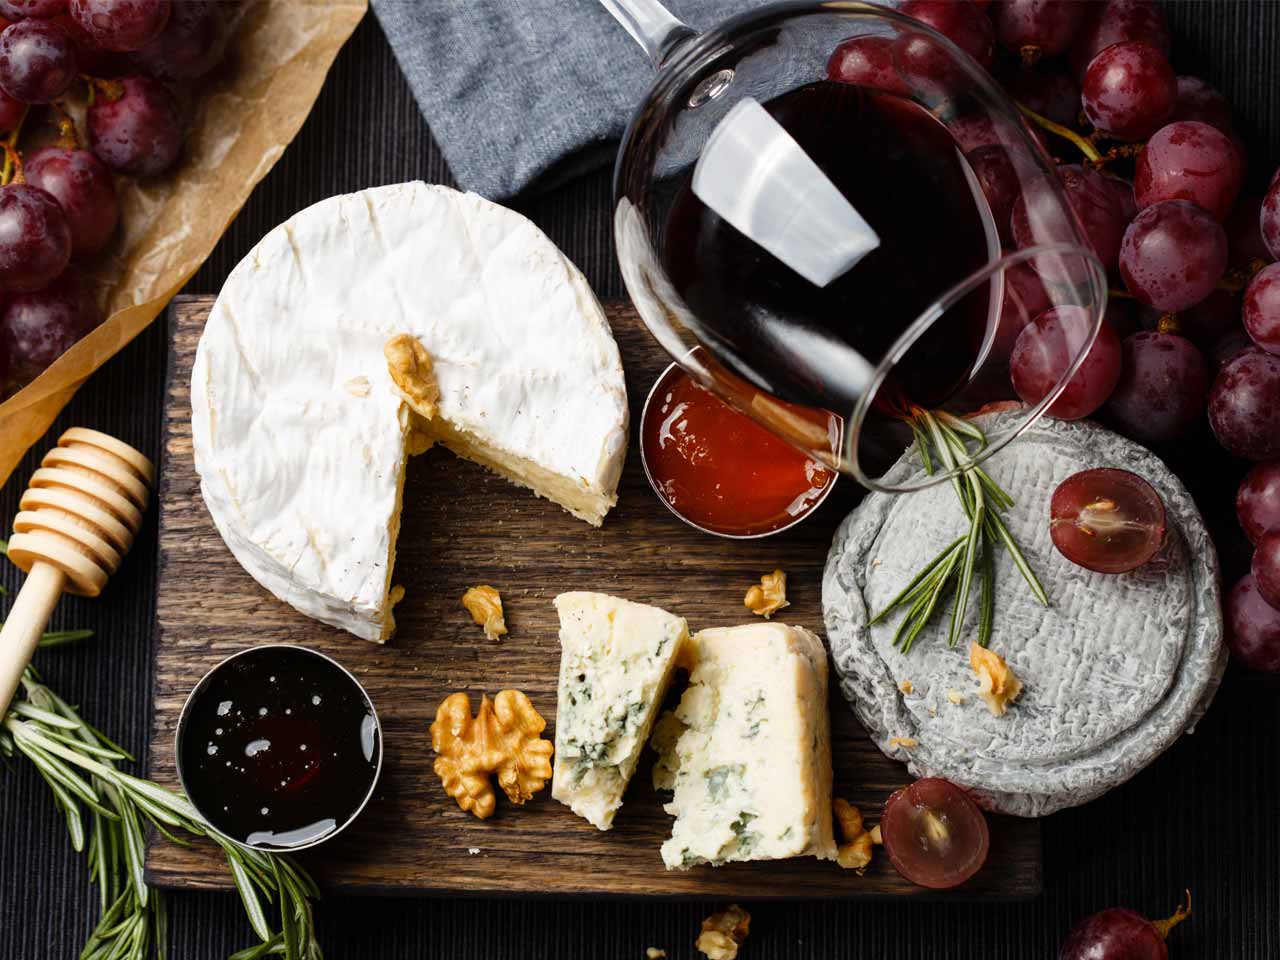 Pairing wine with the right cheese